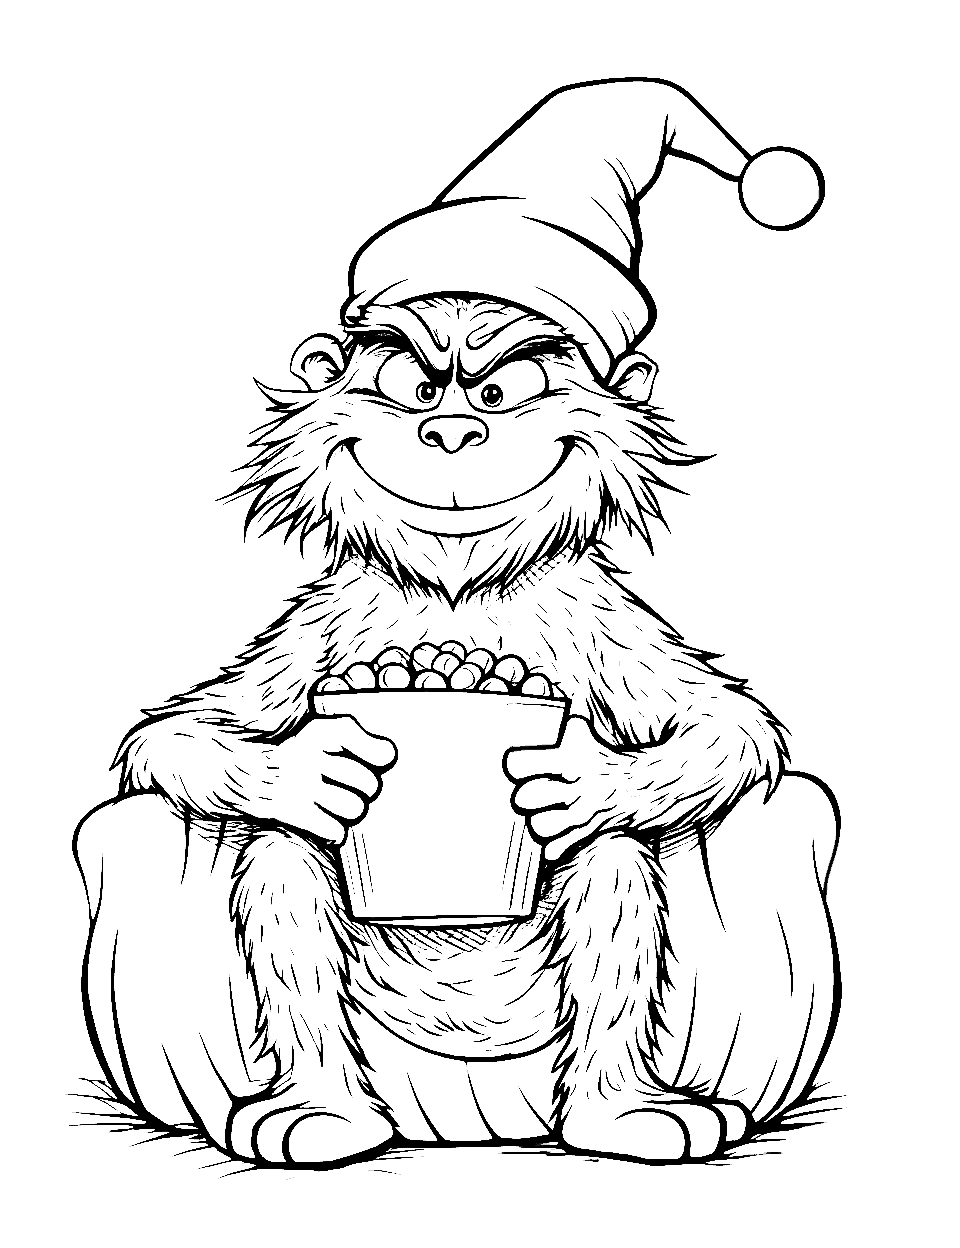 Holiday Movie Watching Coloring Page - The Grinch is watching a holiday movie with a bowl of popcorn.